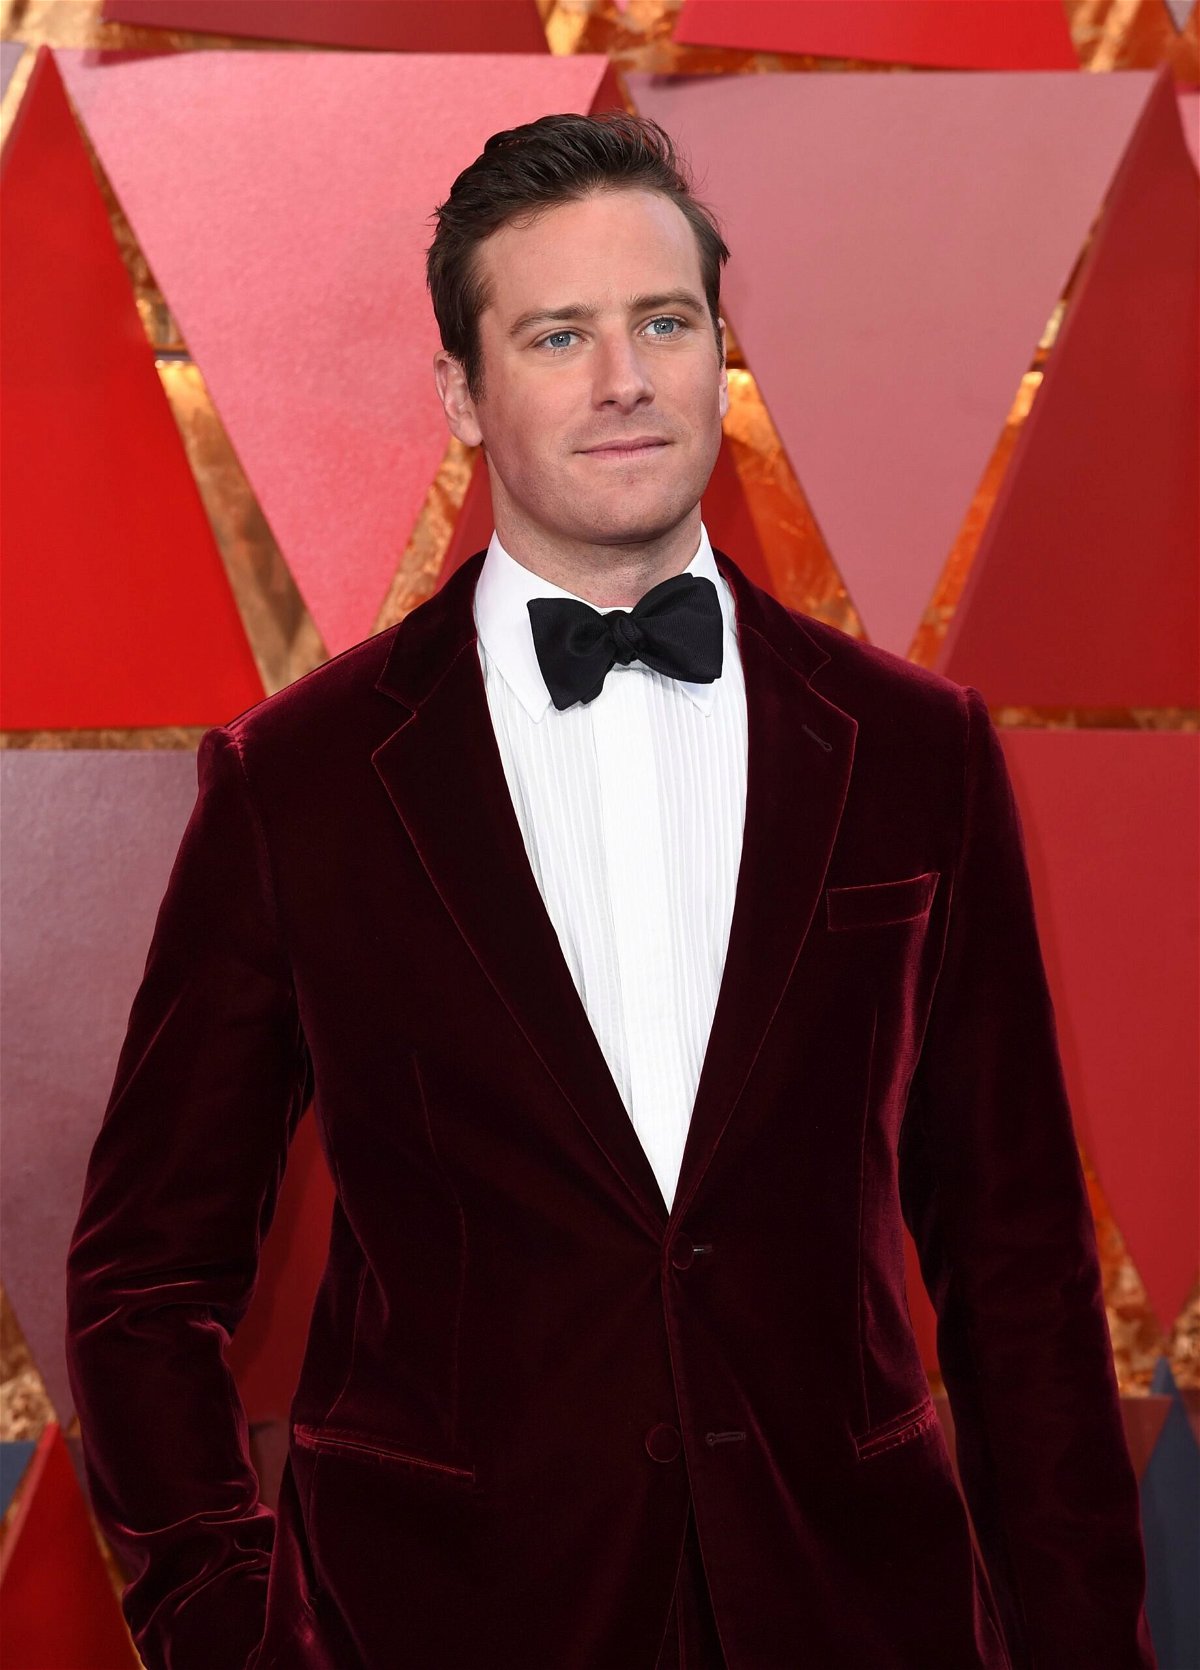 <i>Richard Shotwell/Invision/AP</i><br/>Armie Hammer pictured at the Oscars in 2018 in Los Angeles